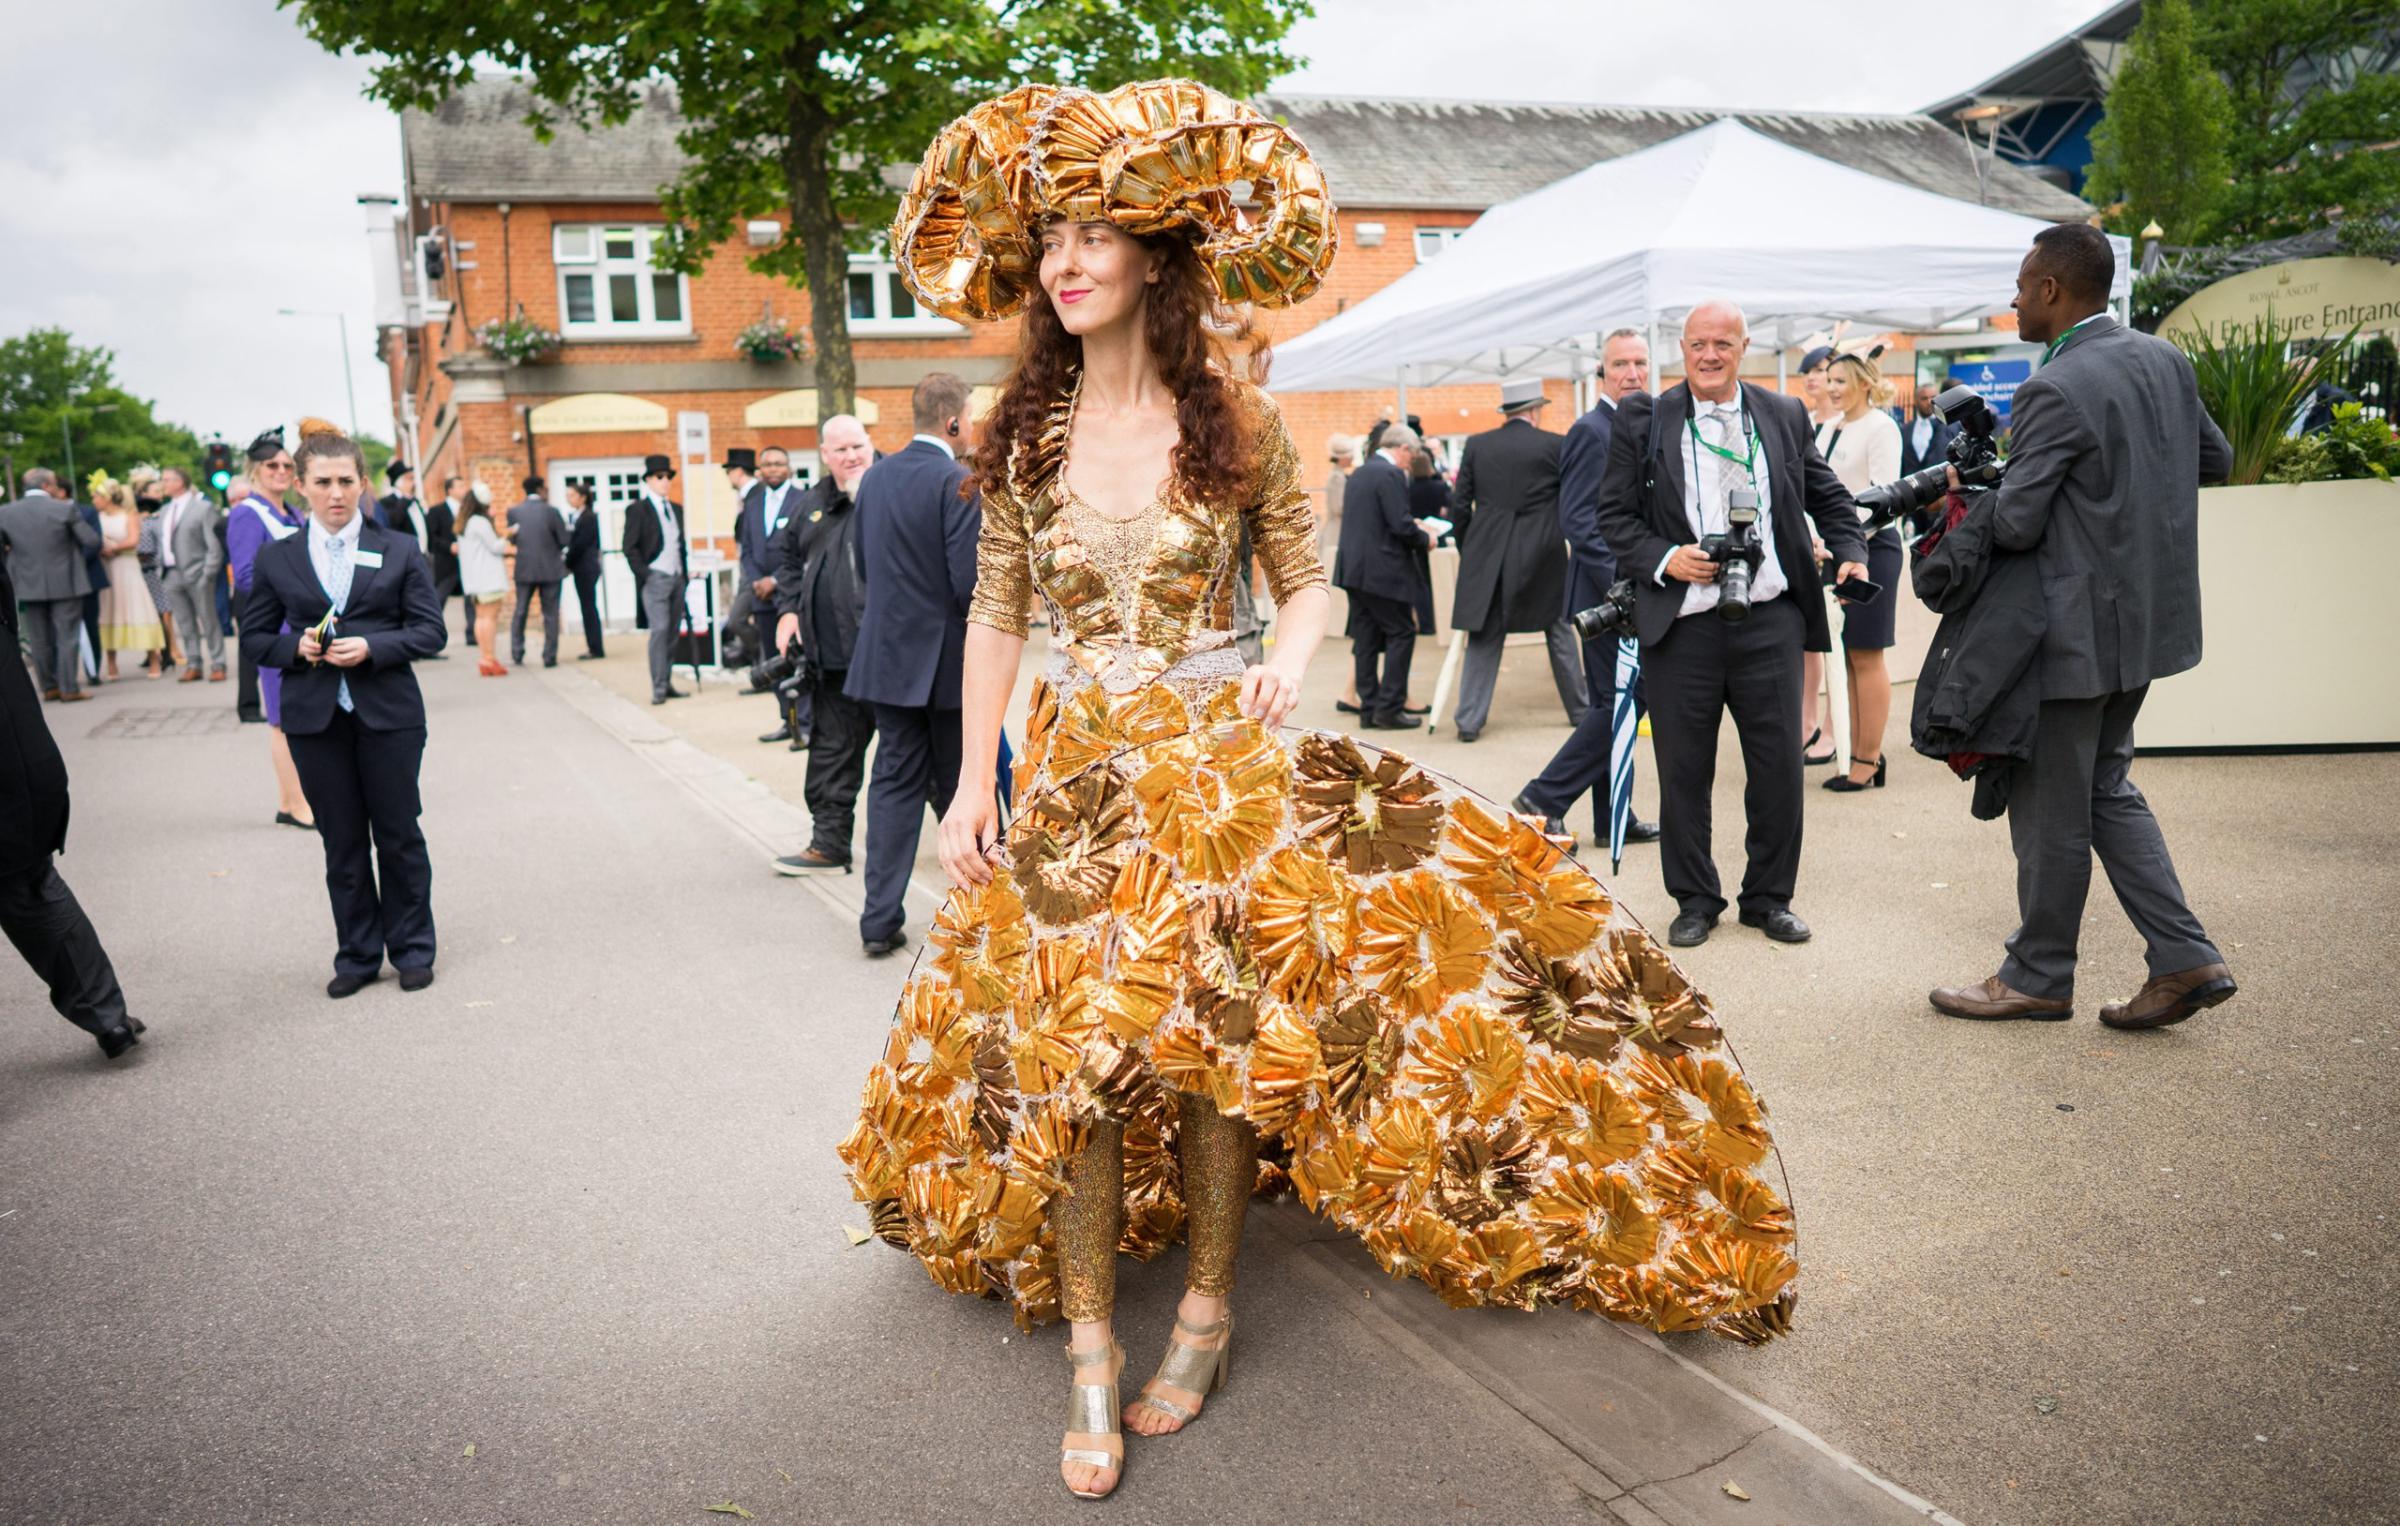 Race-goers arrive on Ladies Day at Royal Ascot, near London, Britain, 16 June 2016. The annual event is a five-day social / horse racing meeting. EPA/ANDREW COWIE